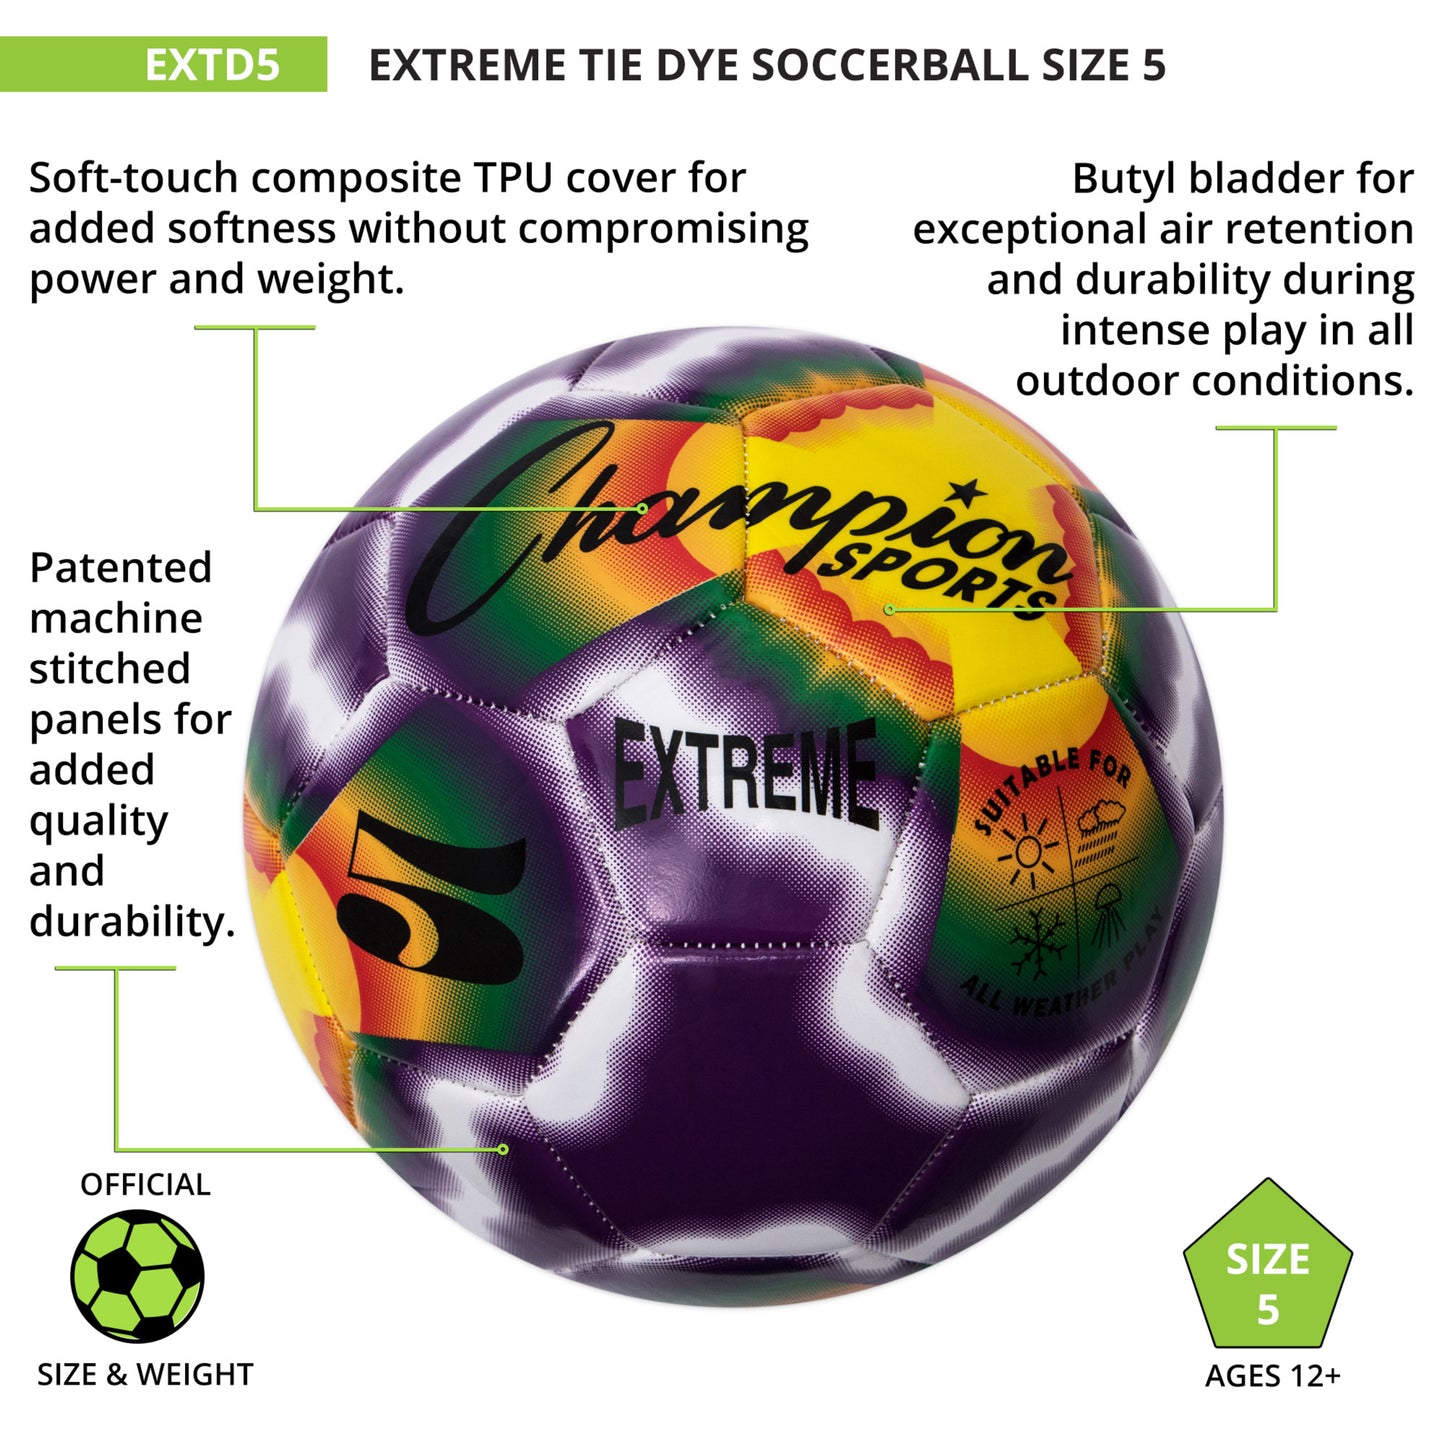 Extreme Tiedye Soccerball, Size 5